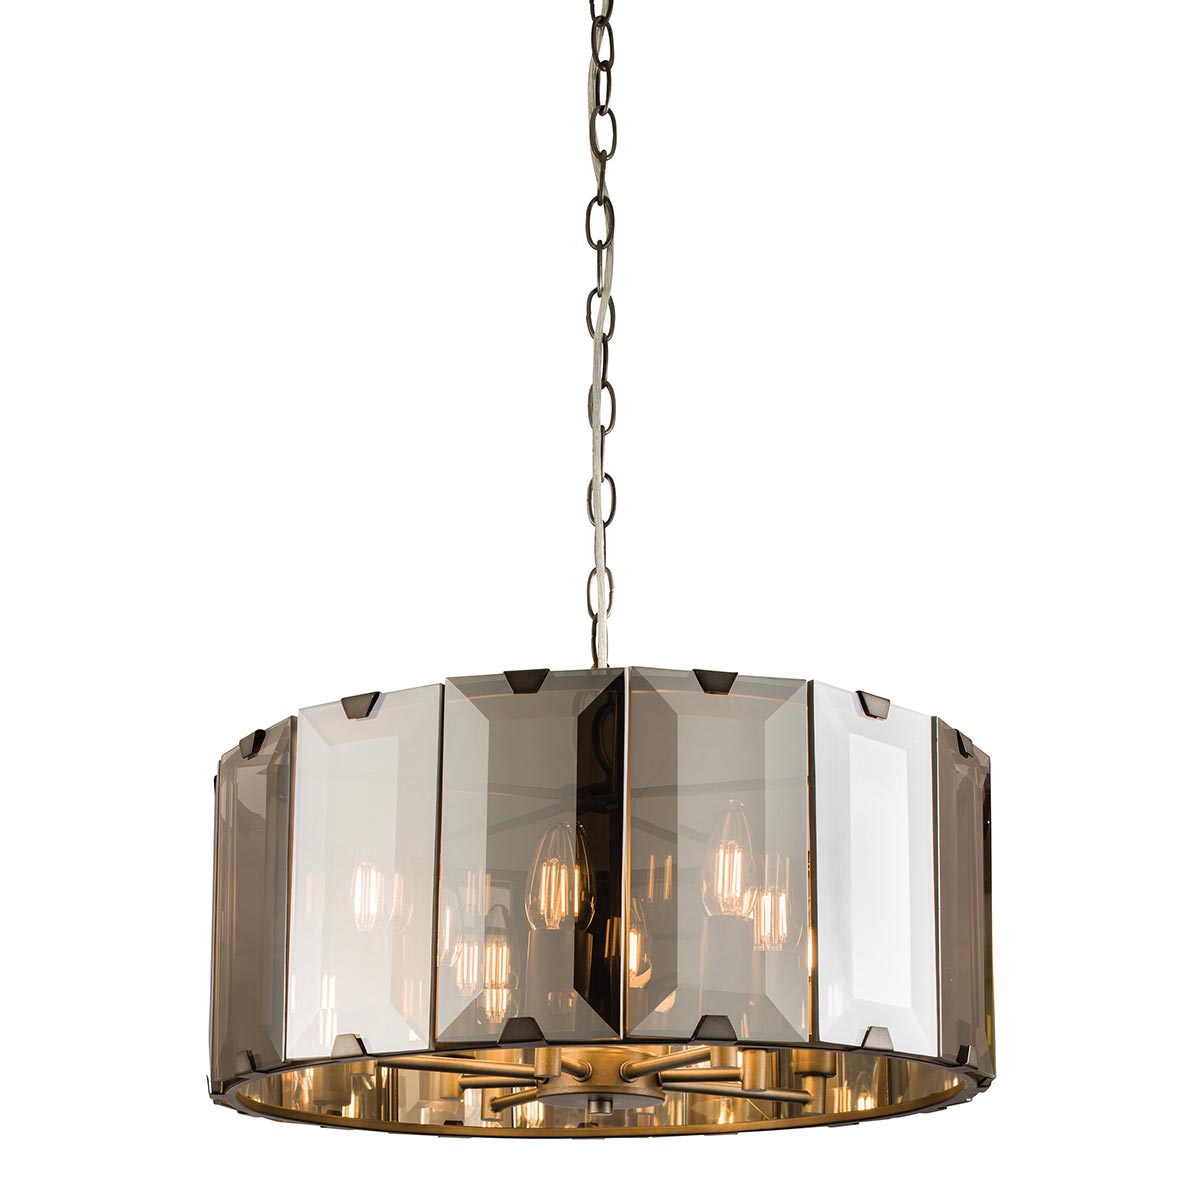 Clooney 8 Light Ceiling Pendant Slate Grey Smoked Glass